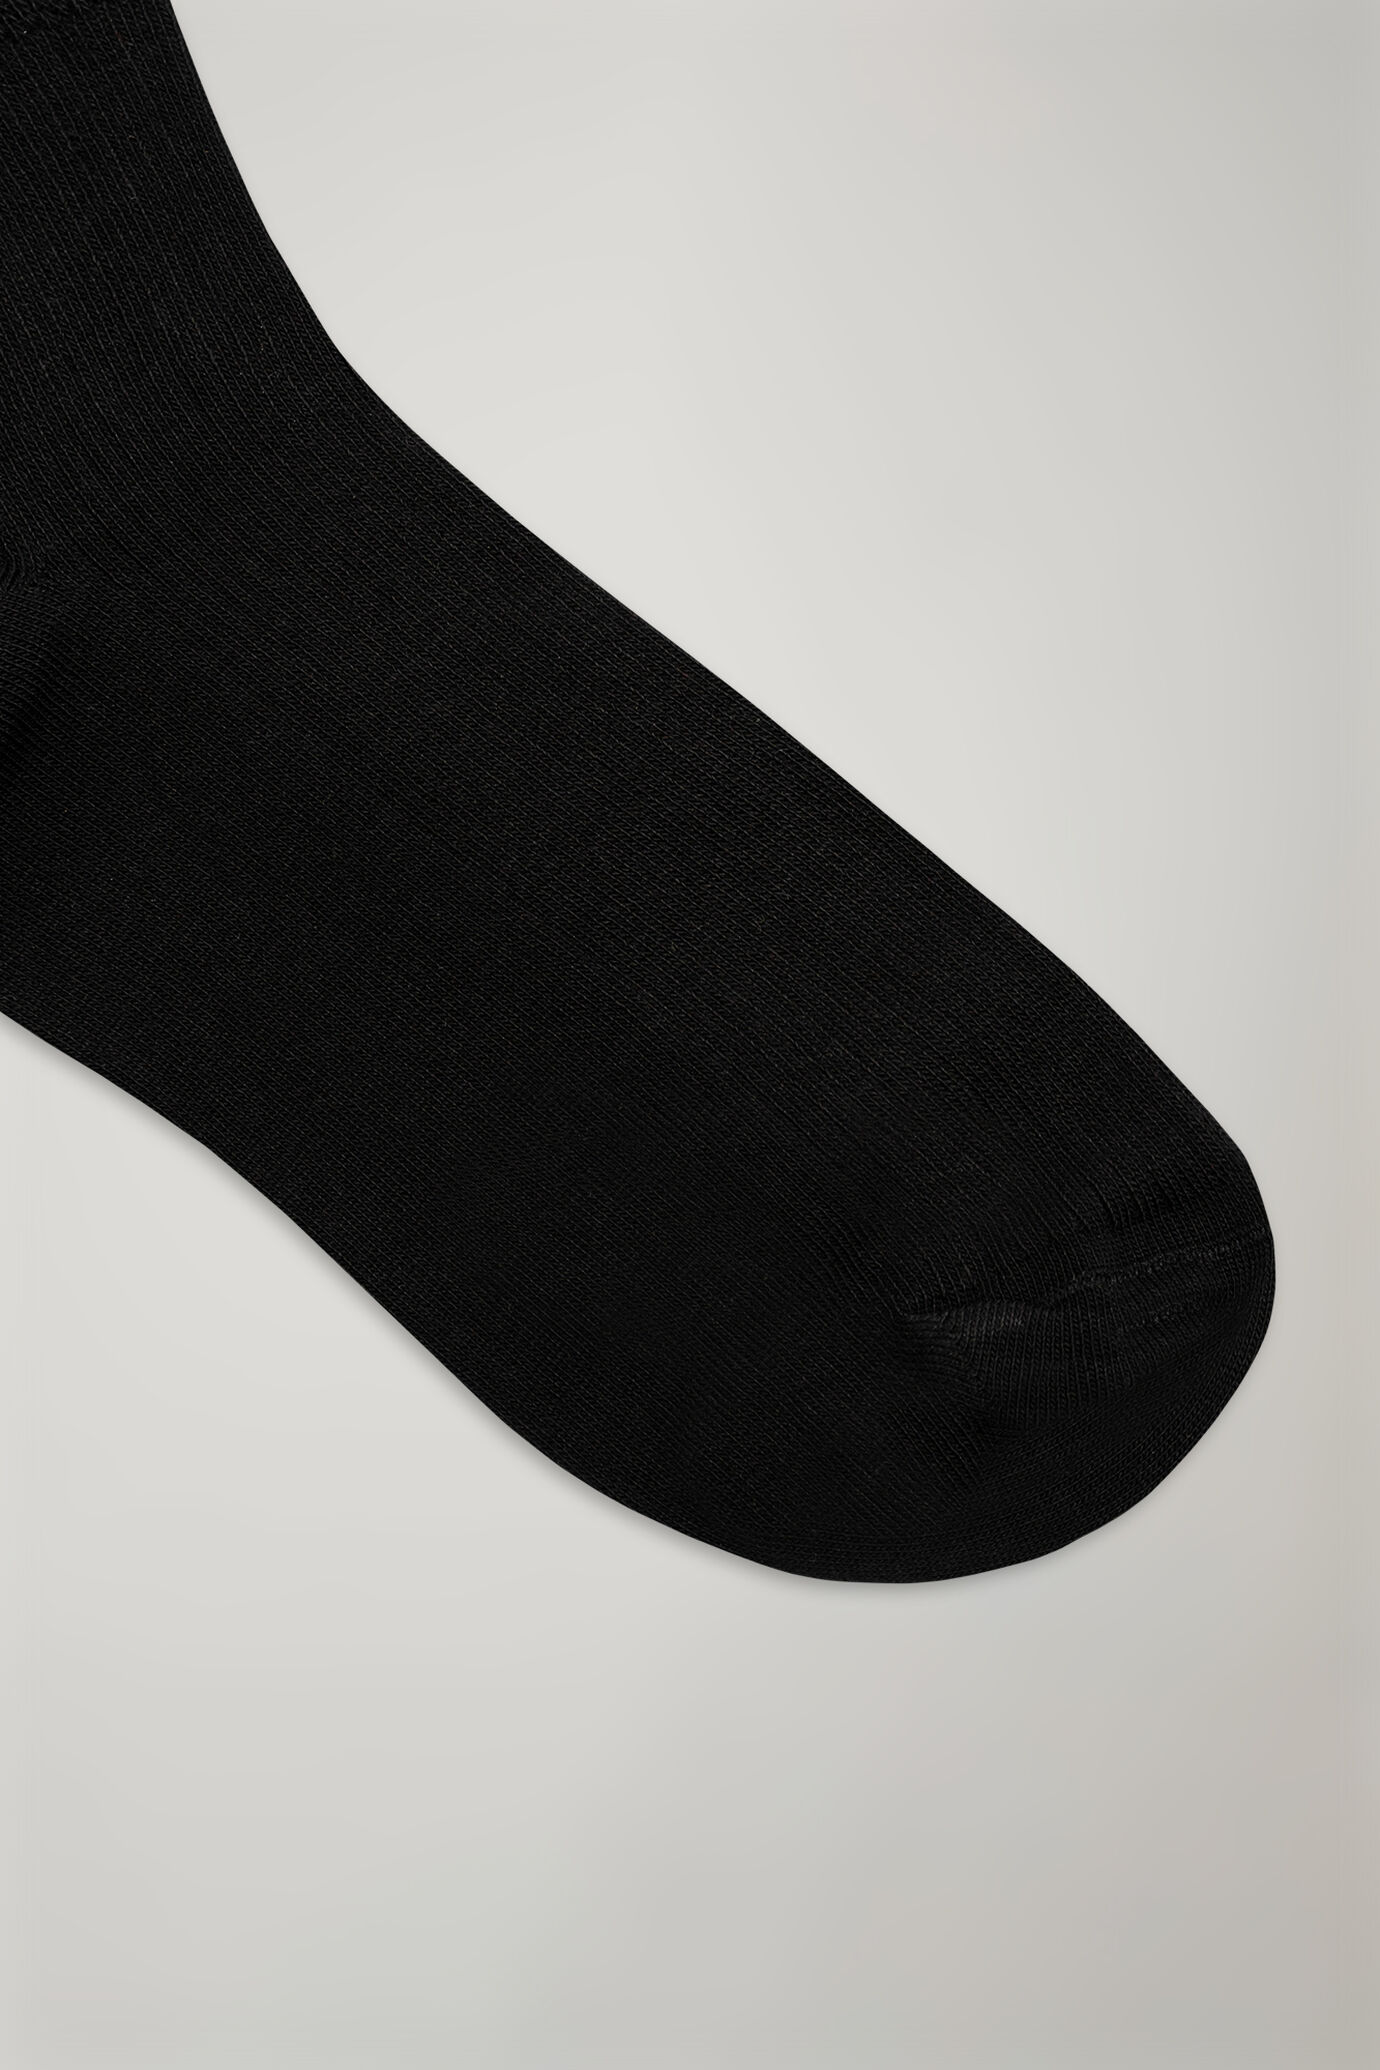 Women’s socks made in Italy in cotton blend solid color ribbed image number 1